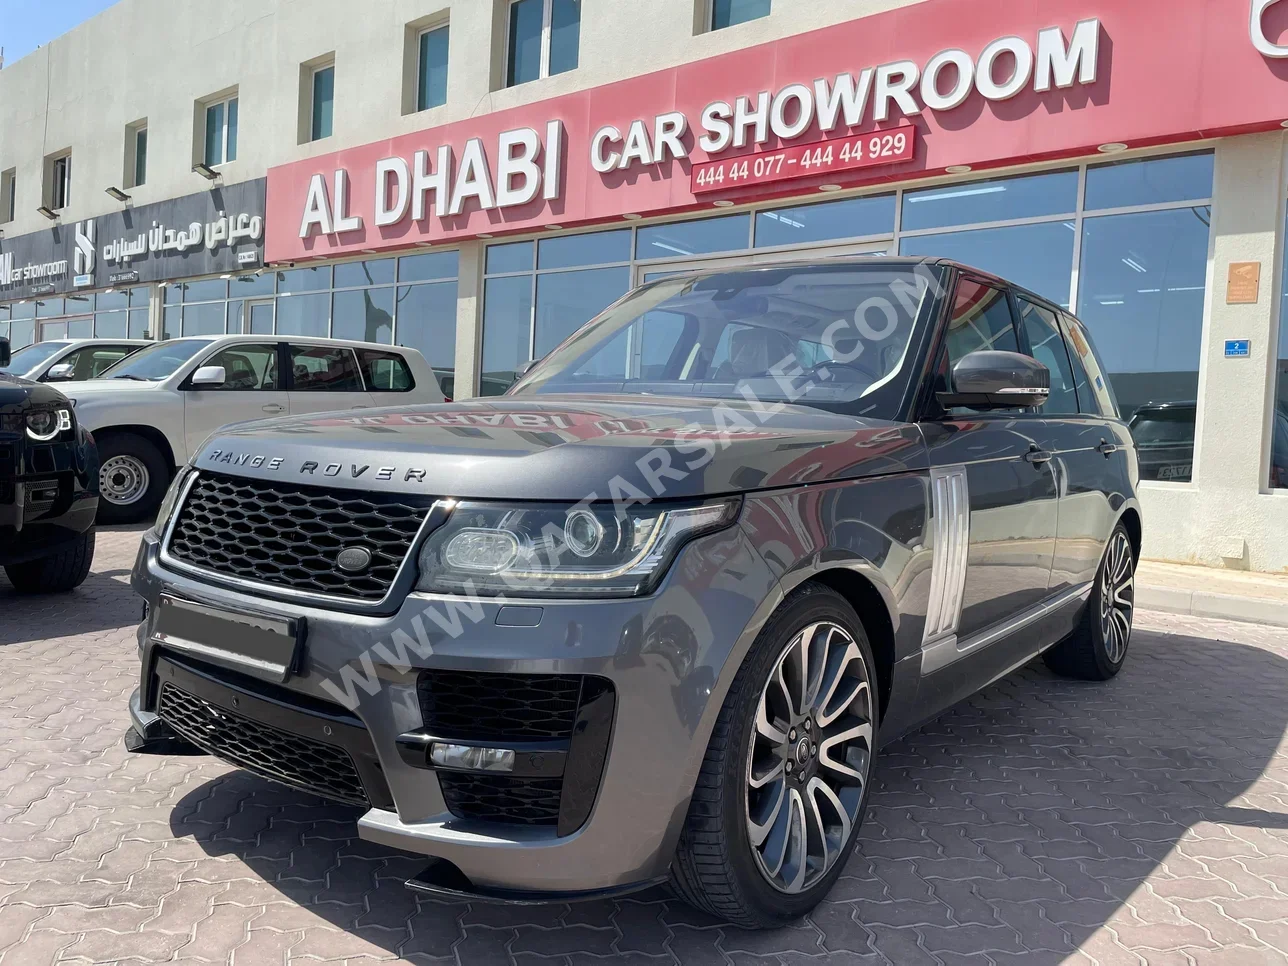 Land Rover  Range Rover  Vogue Super charged  2016  Automatic  224,000 Km  8 Cylinder  Four Wheel Drive (4WD)  SUV  Gray